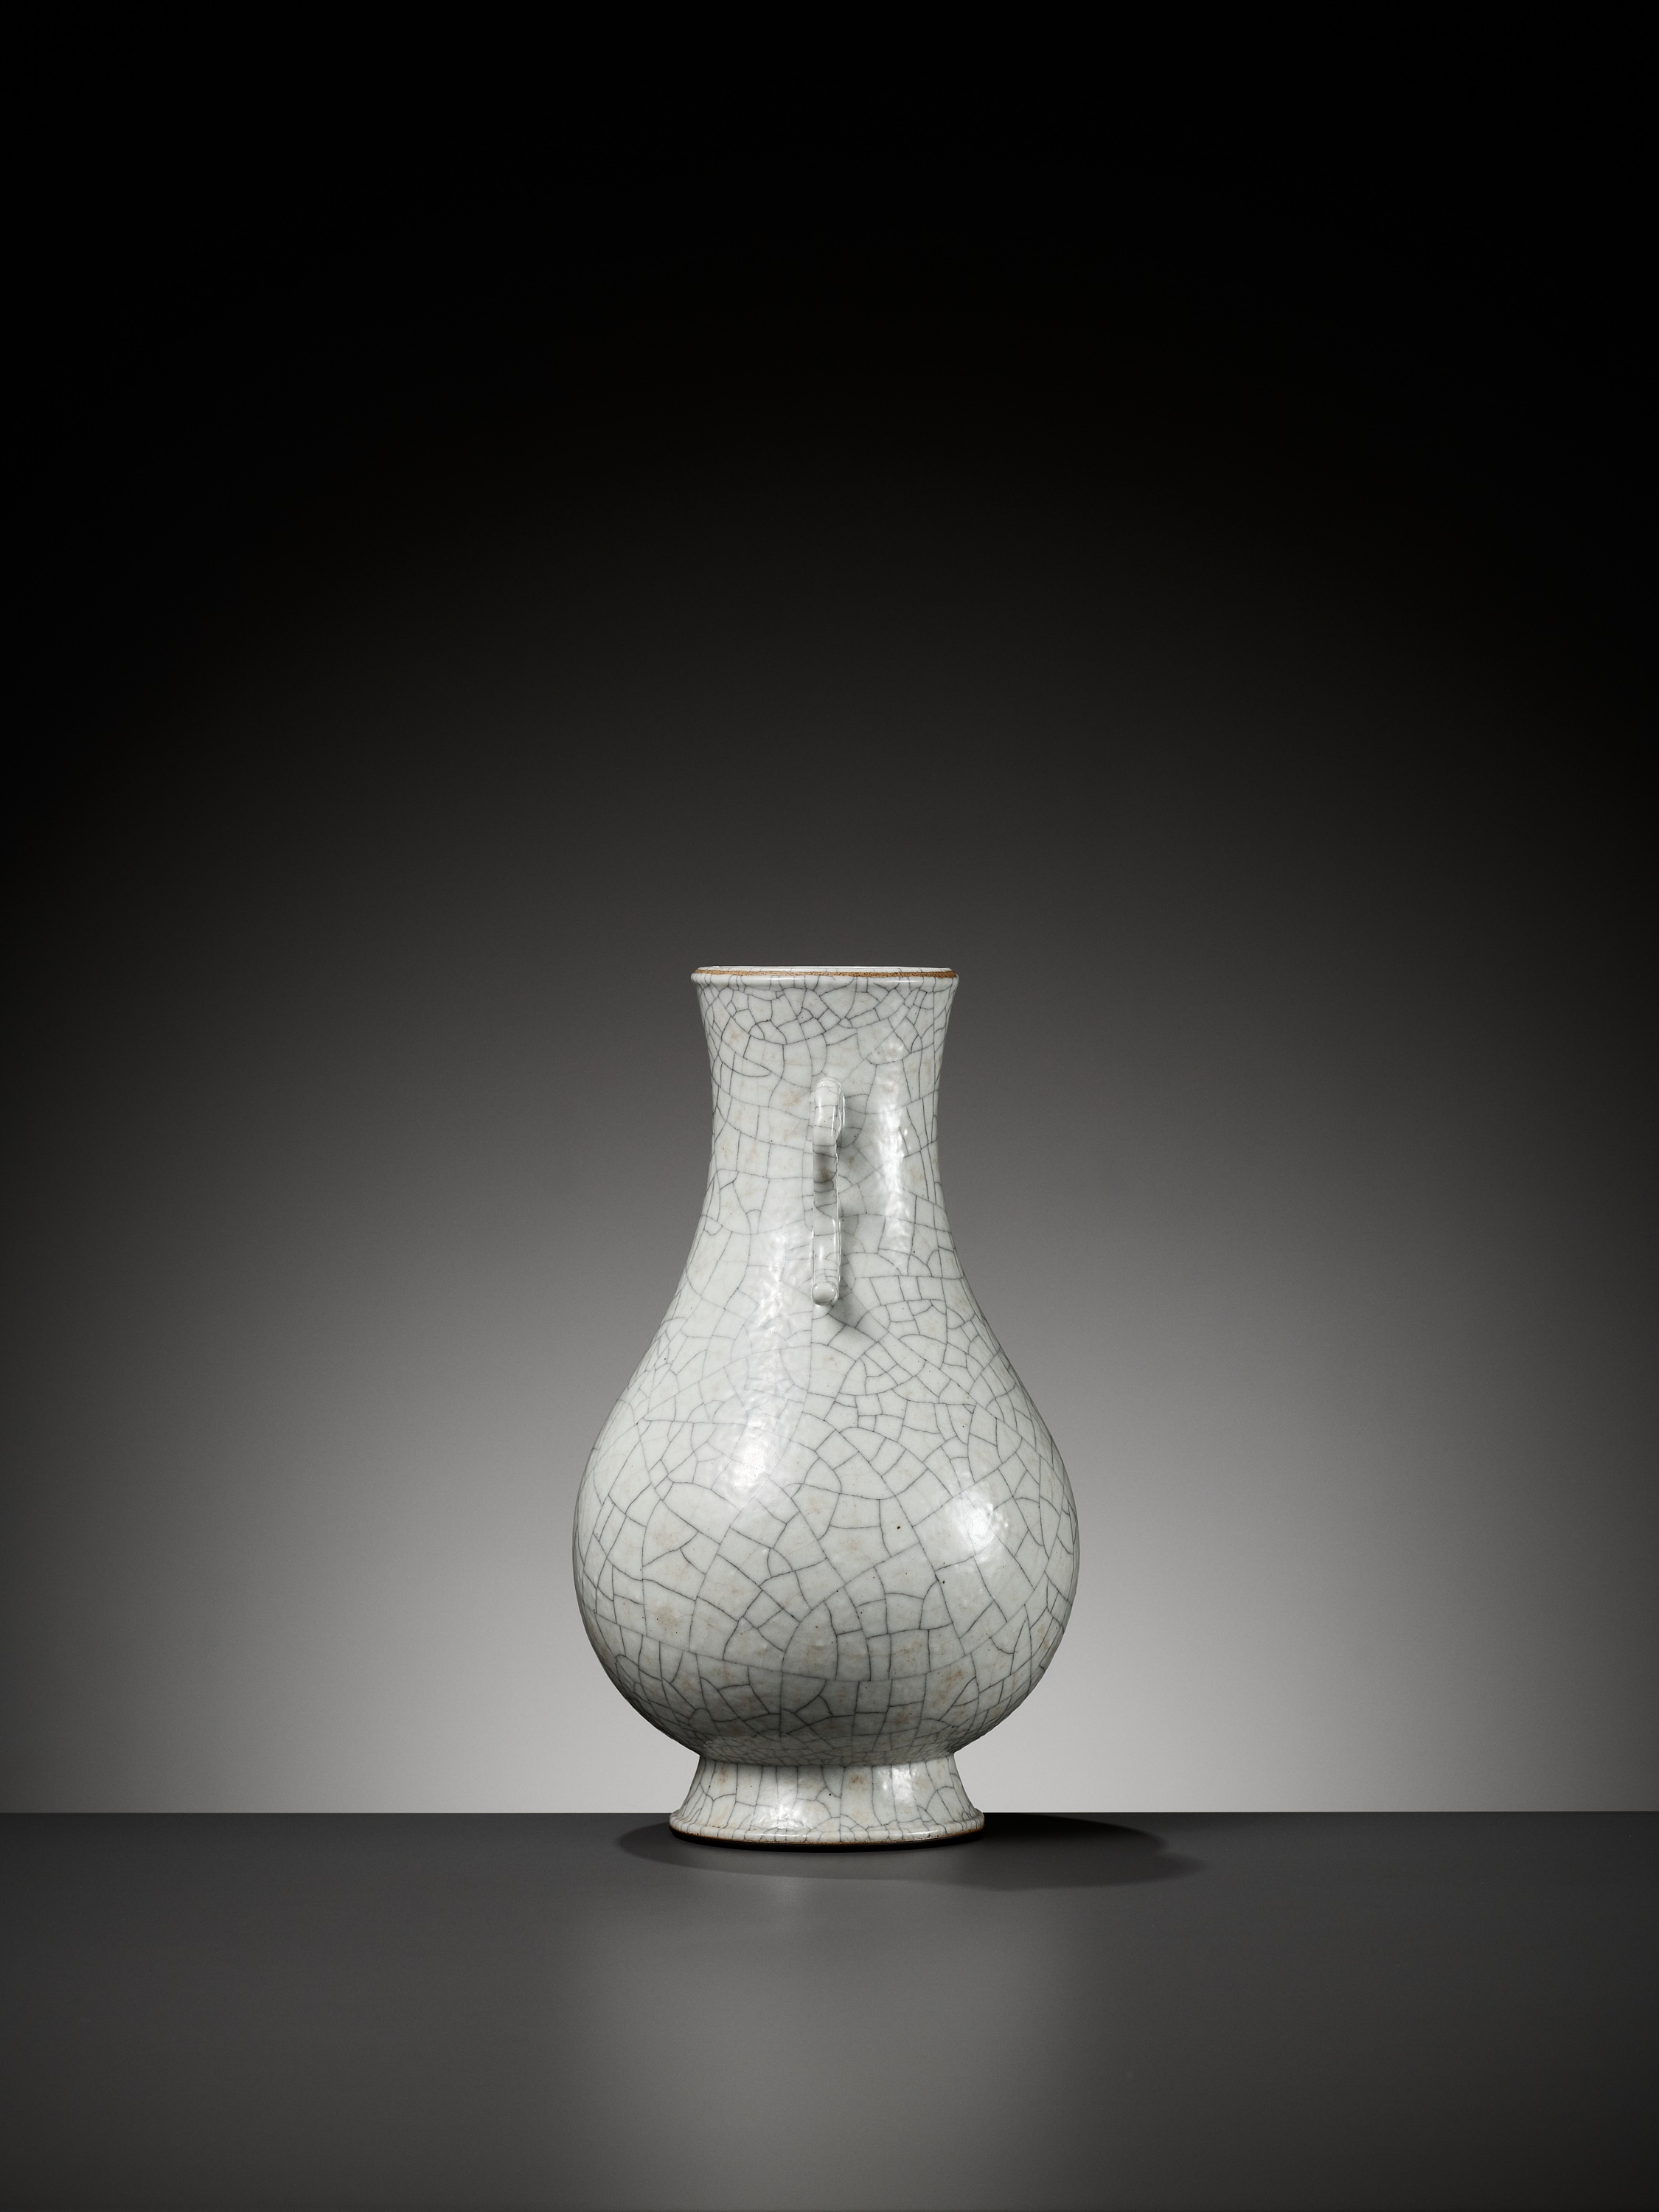 A GUAN-TYPE GLAZED PEAR-SHAPED VASE, HU, 19TH CENTURY - Image 6 of 11